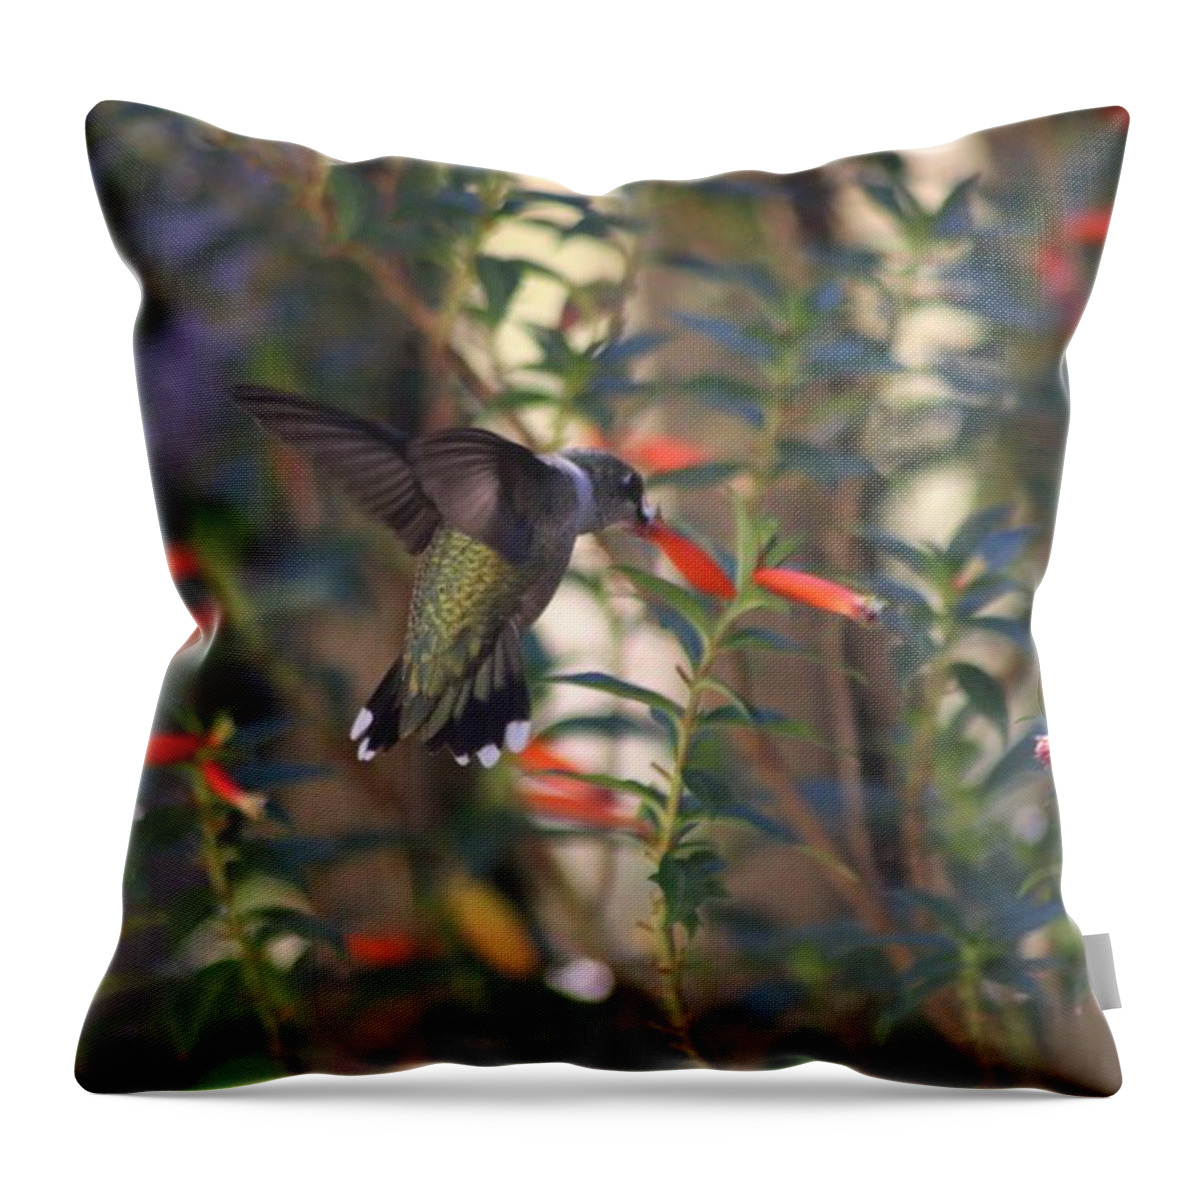 Hummingbird Throw Pillow featuring the photograph The Morning Whisper by Living Color Photography Lorraine Lynch